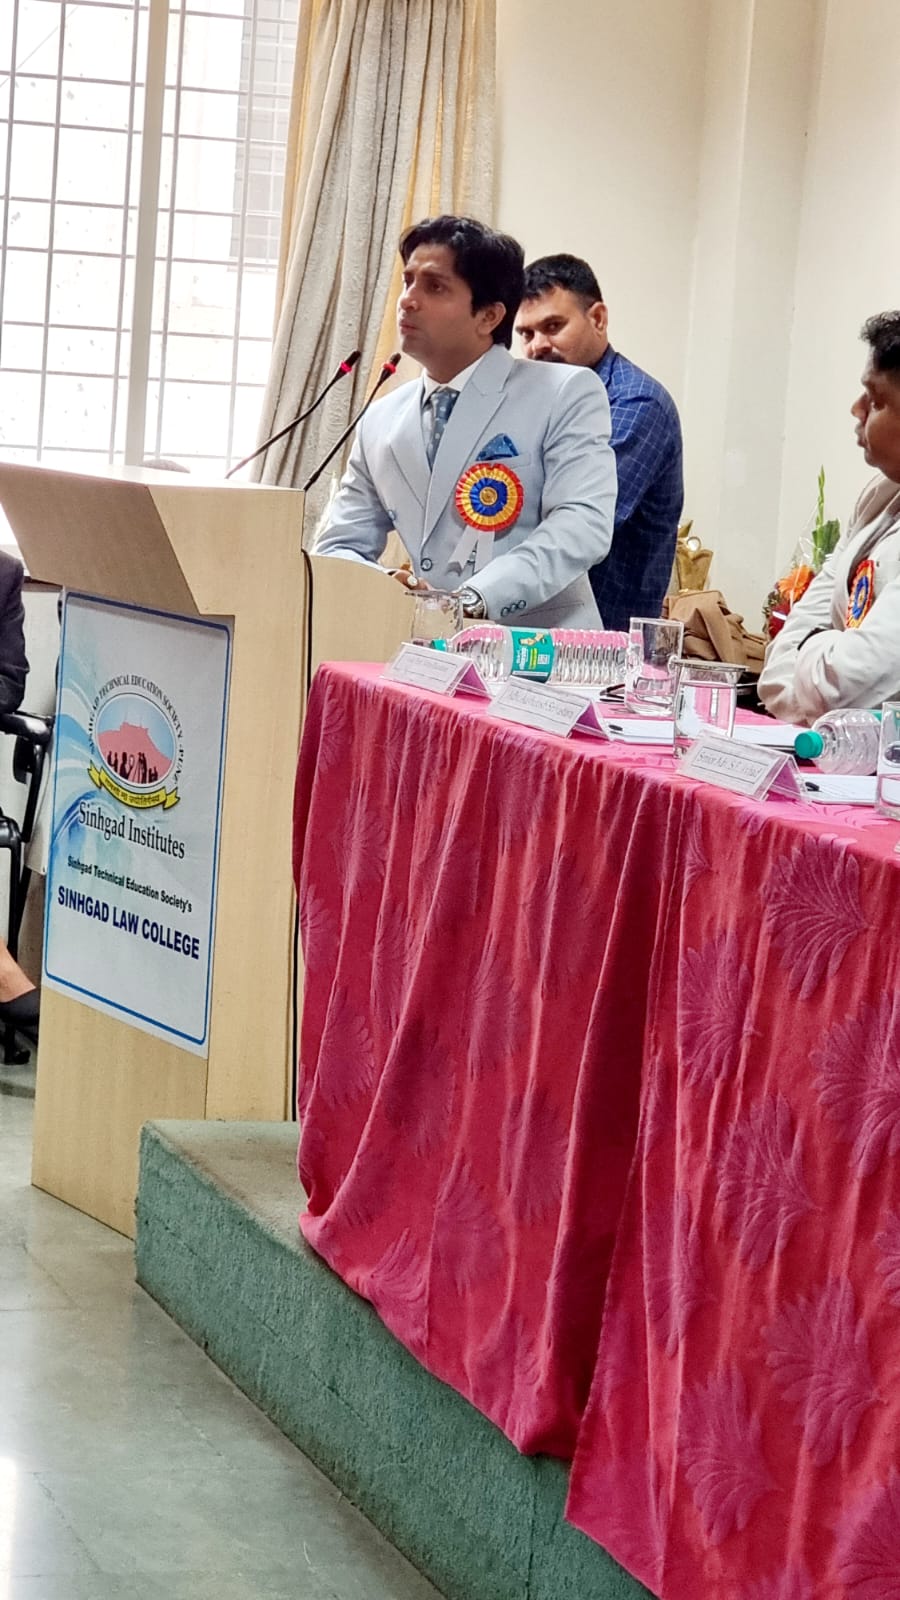 ADVOCATE AASHUTOSH SRIVASTAVA invited as Chief Guest by Sinhgad Law College and addressing all the aspiring law students